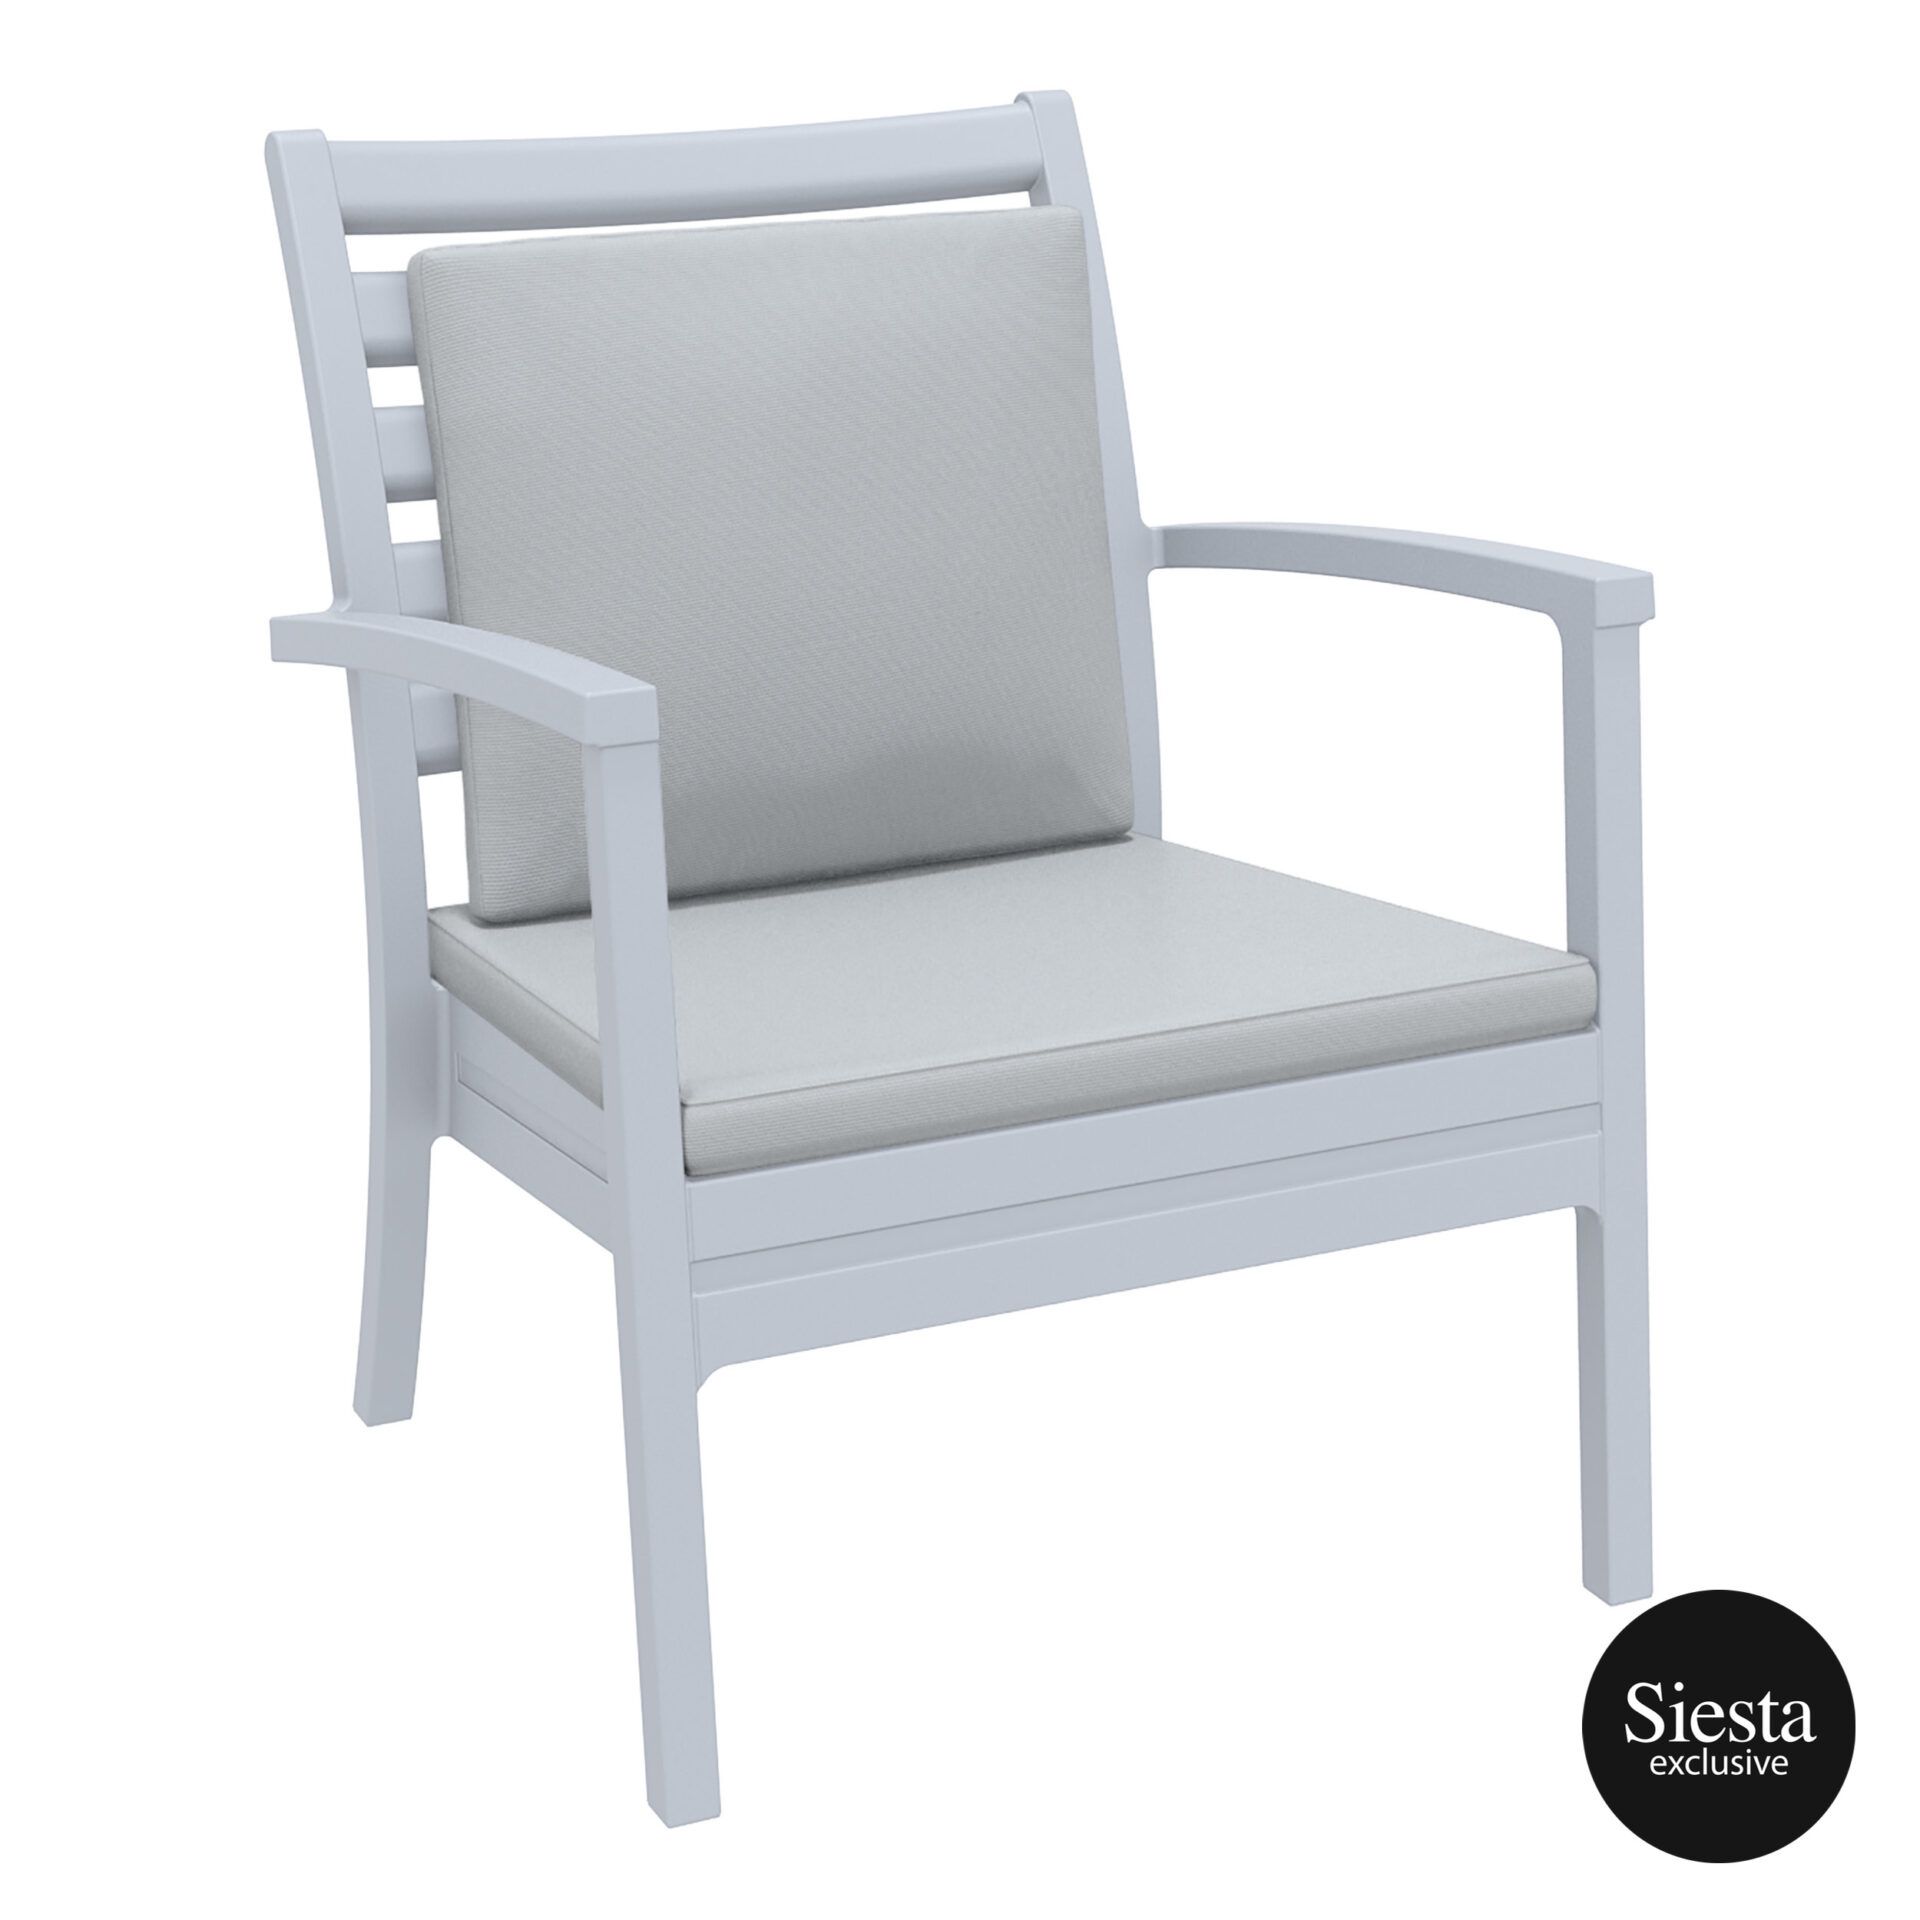 Artemis XL Armchair - Silver Grey with Light Grey Seat and Back Cushion